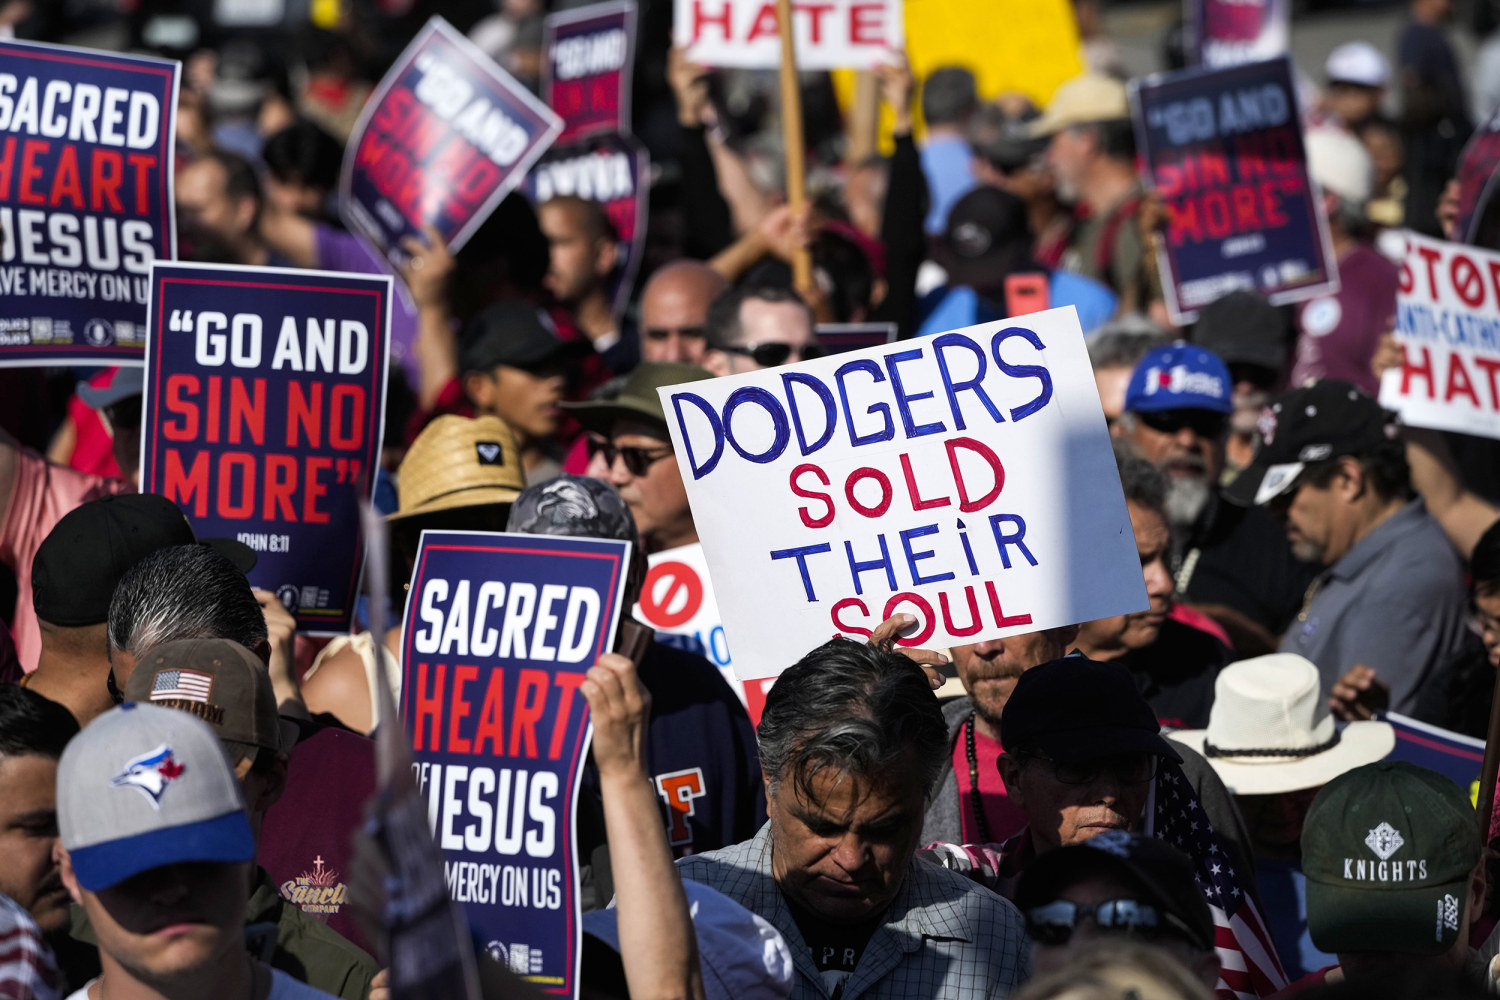 Dodgers facing backlash after disinviting LGBTQ group from Pride